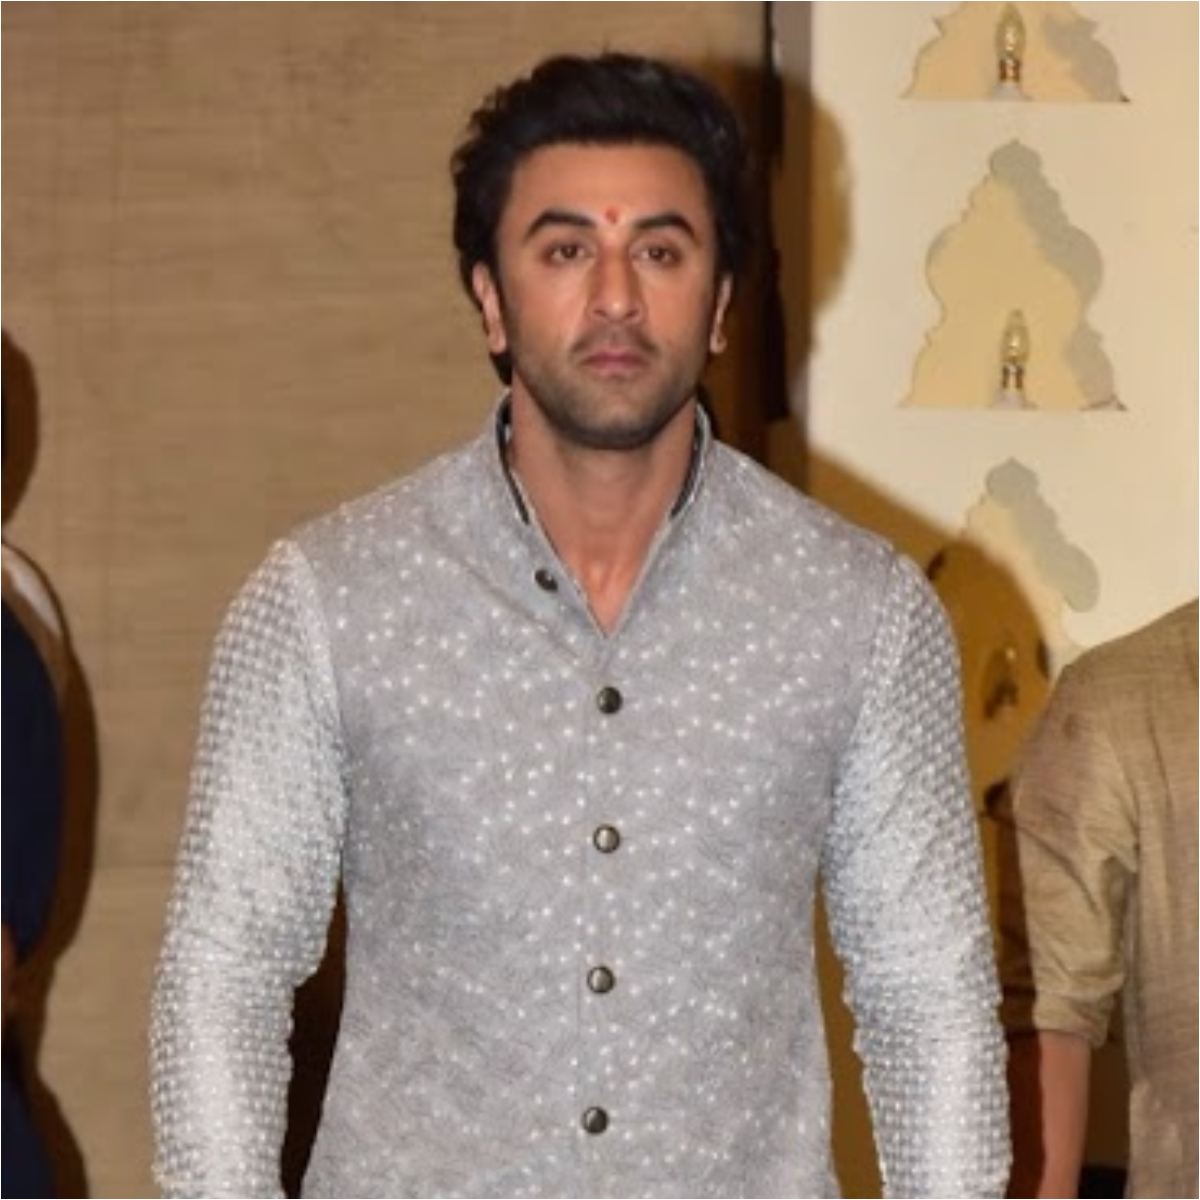 EXCLUSIVE: Ranbir Kapoor tests positive for Covid-19? Here’s what his uncle Randhir Kapoor has to say